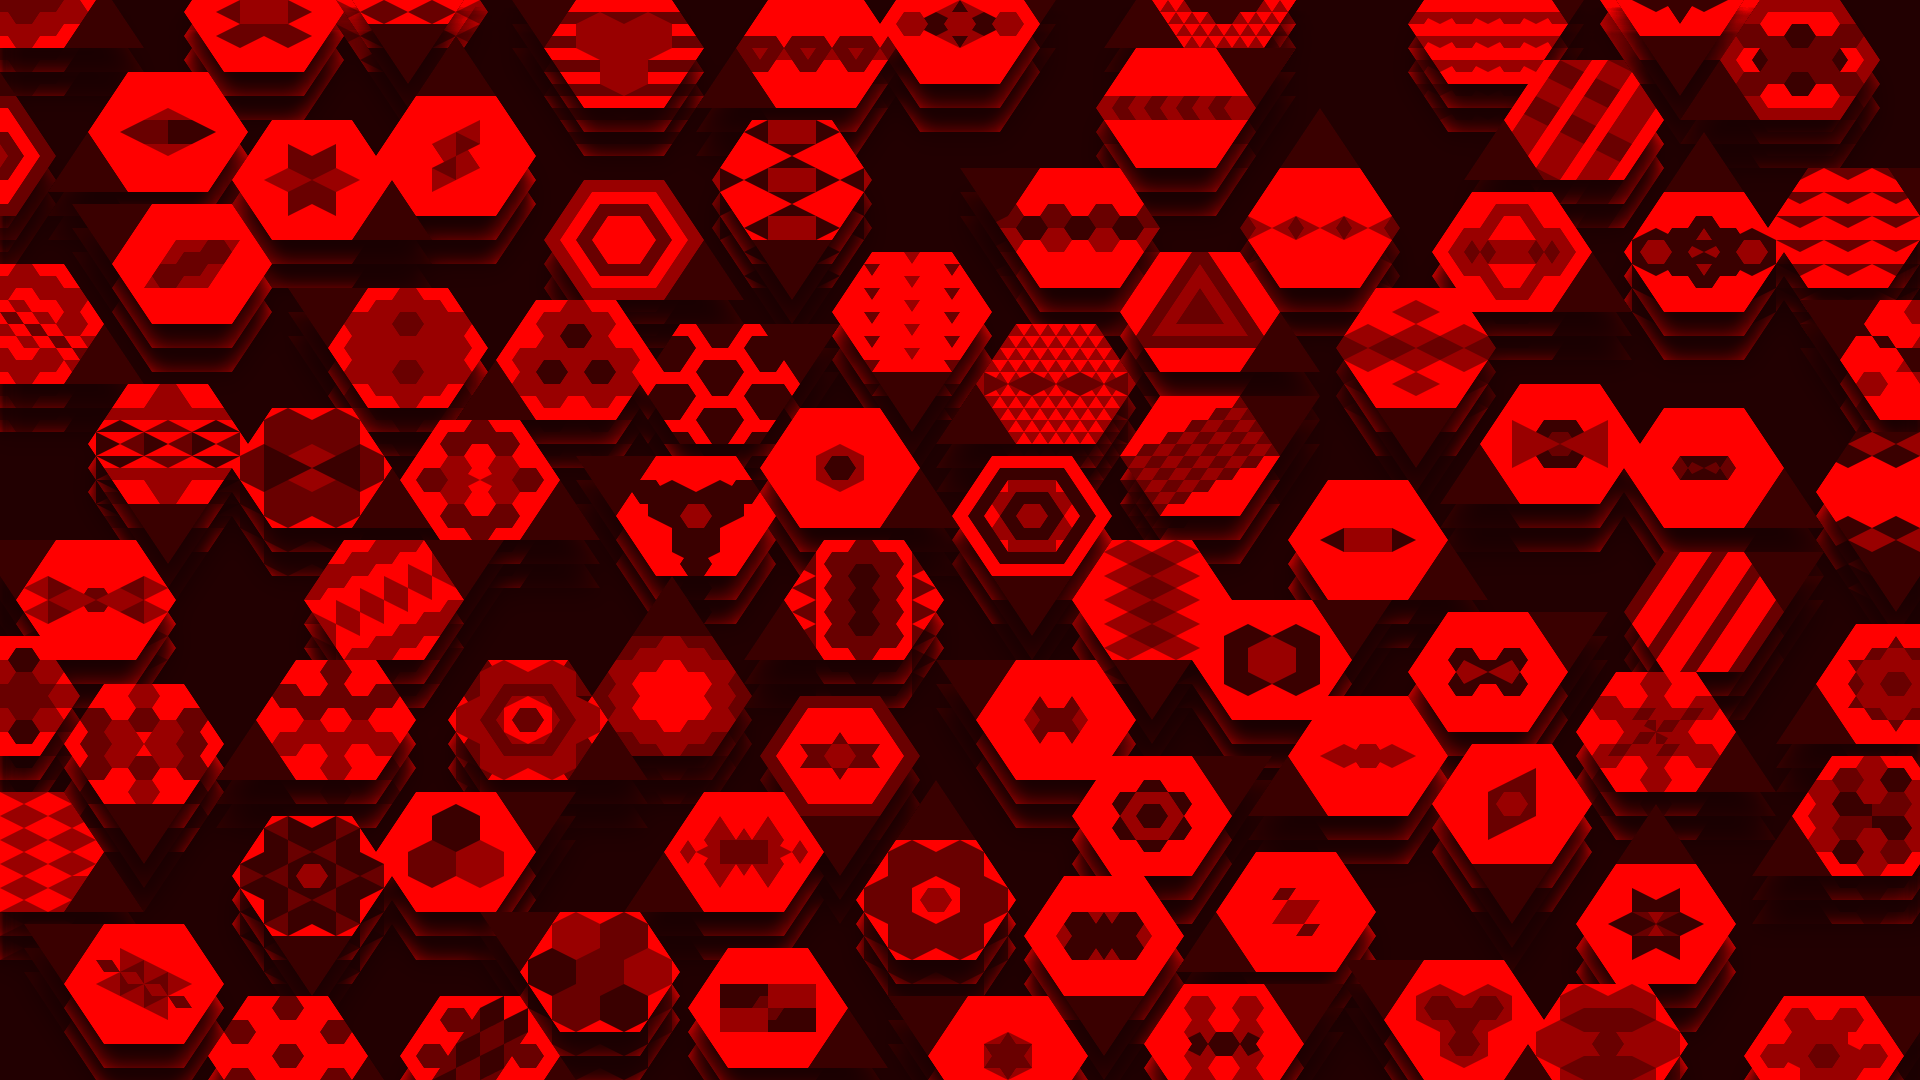 Hexagon in a Red Triangle Logo - 1920x1080] Patterned Red Triangle-Hexagons : wallpaper